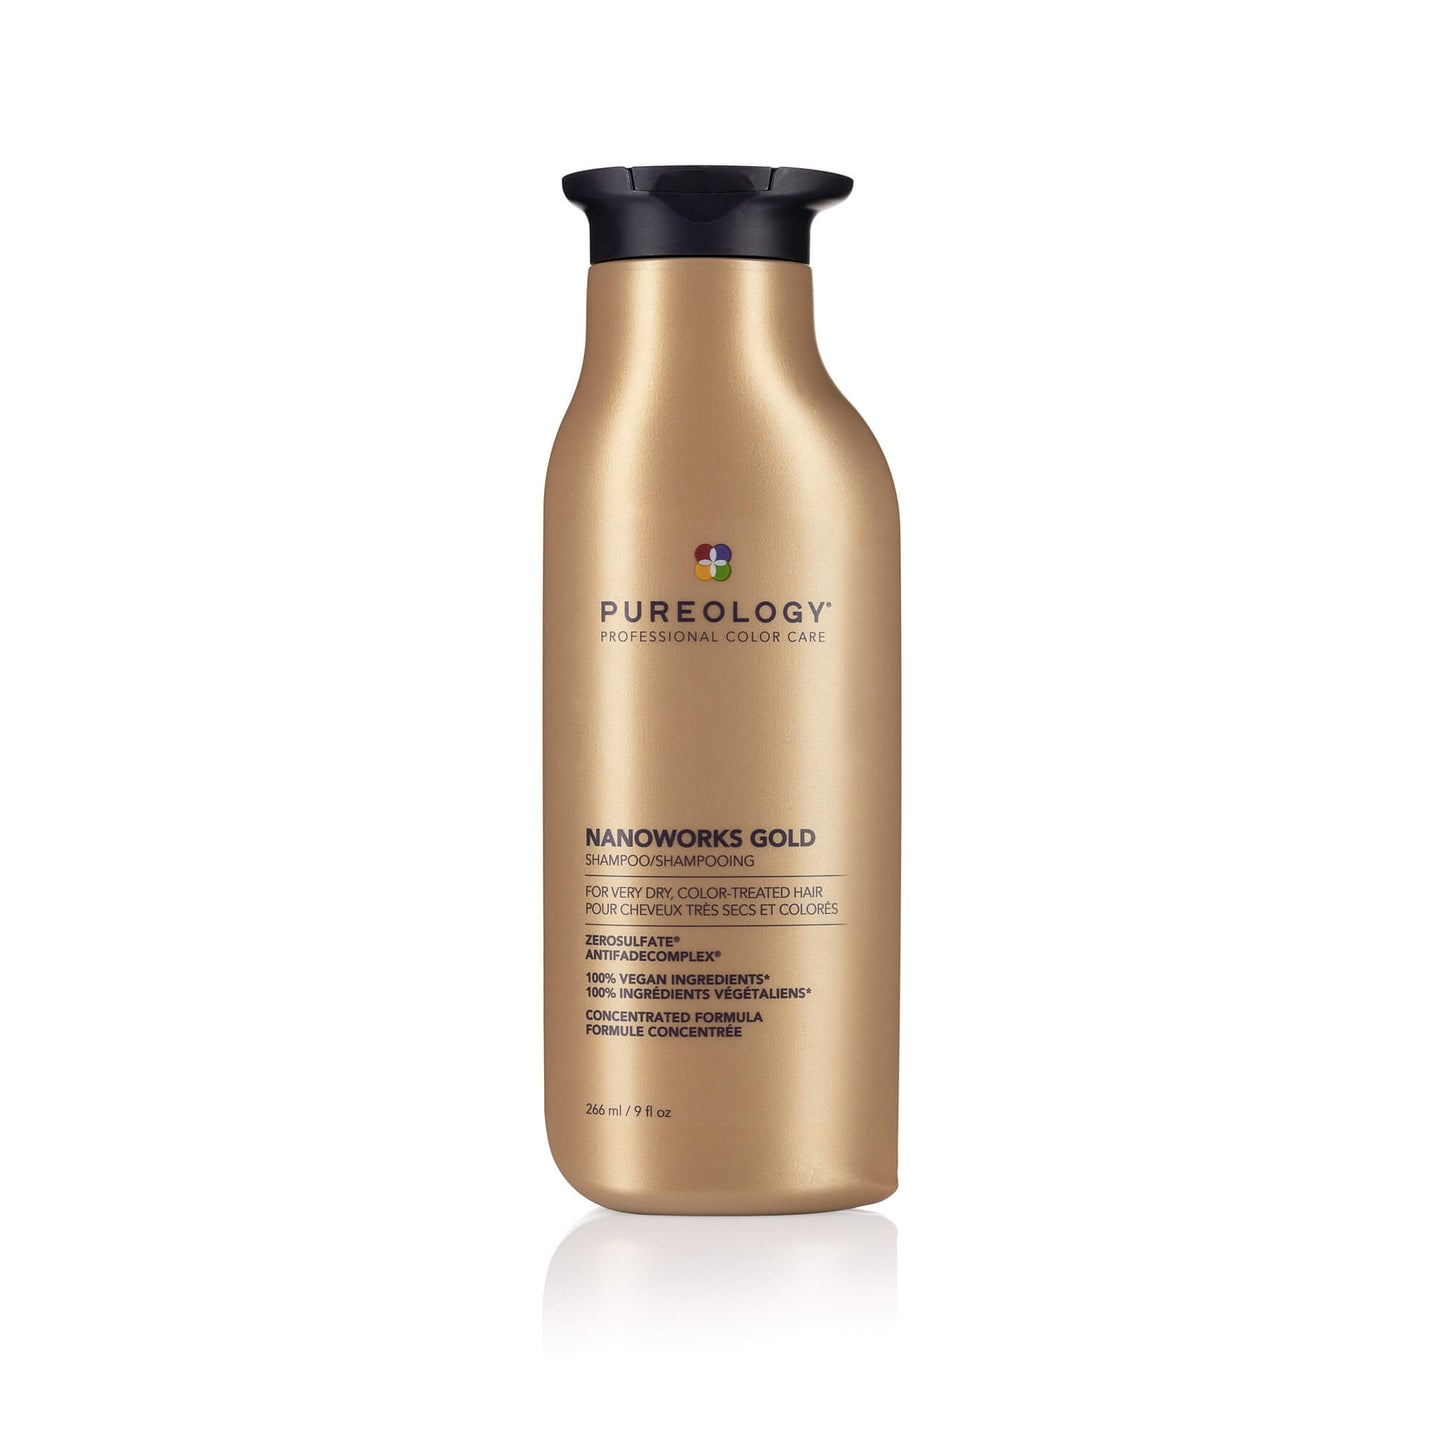 Pureology Nanoworks Gold Shampoo for Aging Hair 266ml